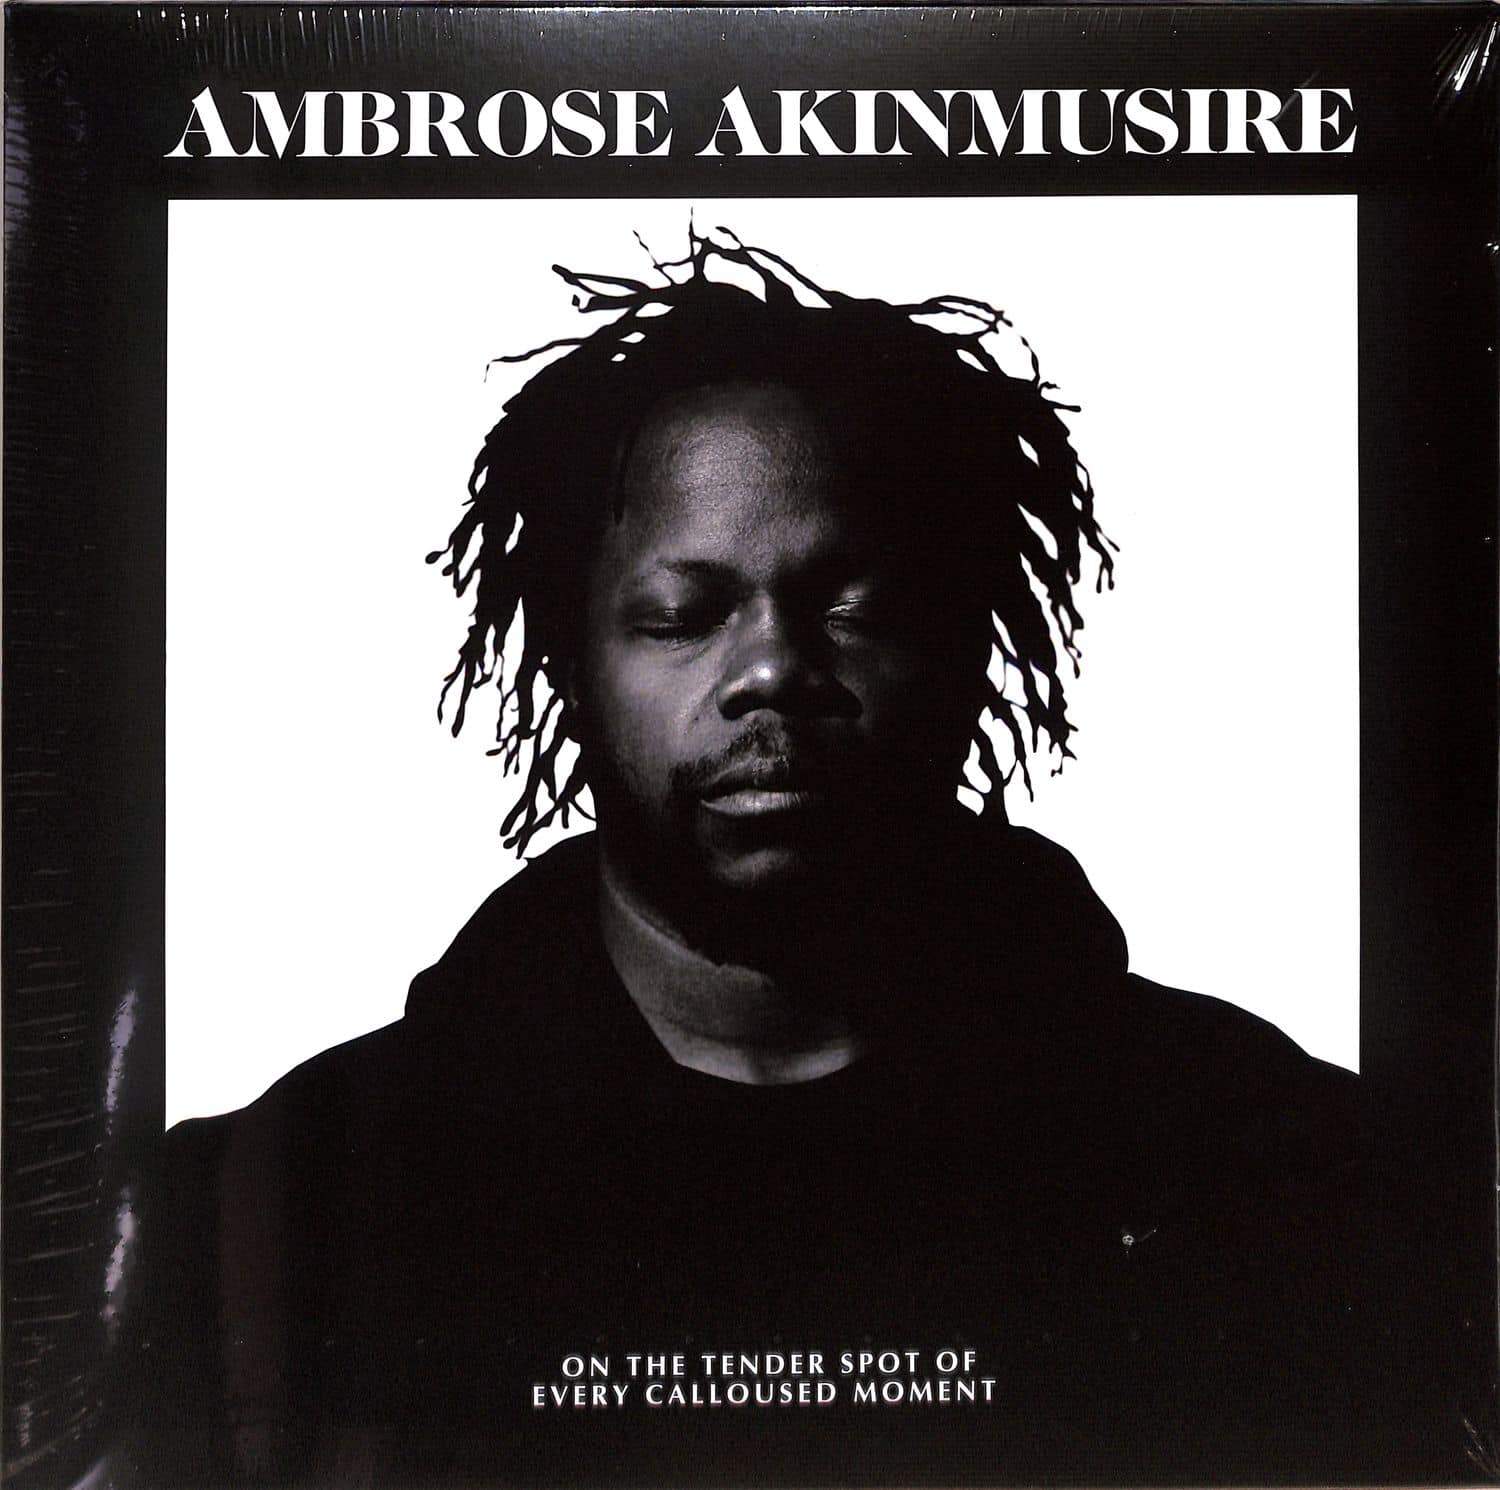 Ambrose Akinmusire - ON THE TENDER SPOT OF EVERY CALLOUSED MOMENT 